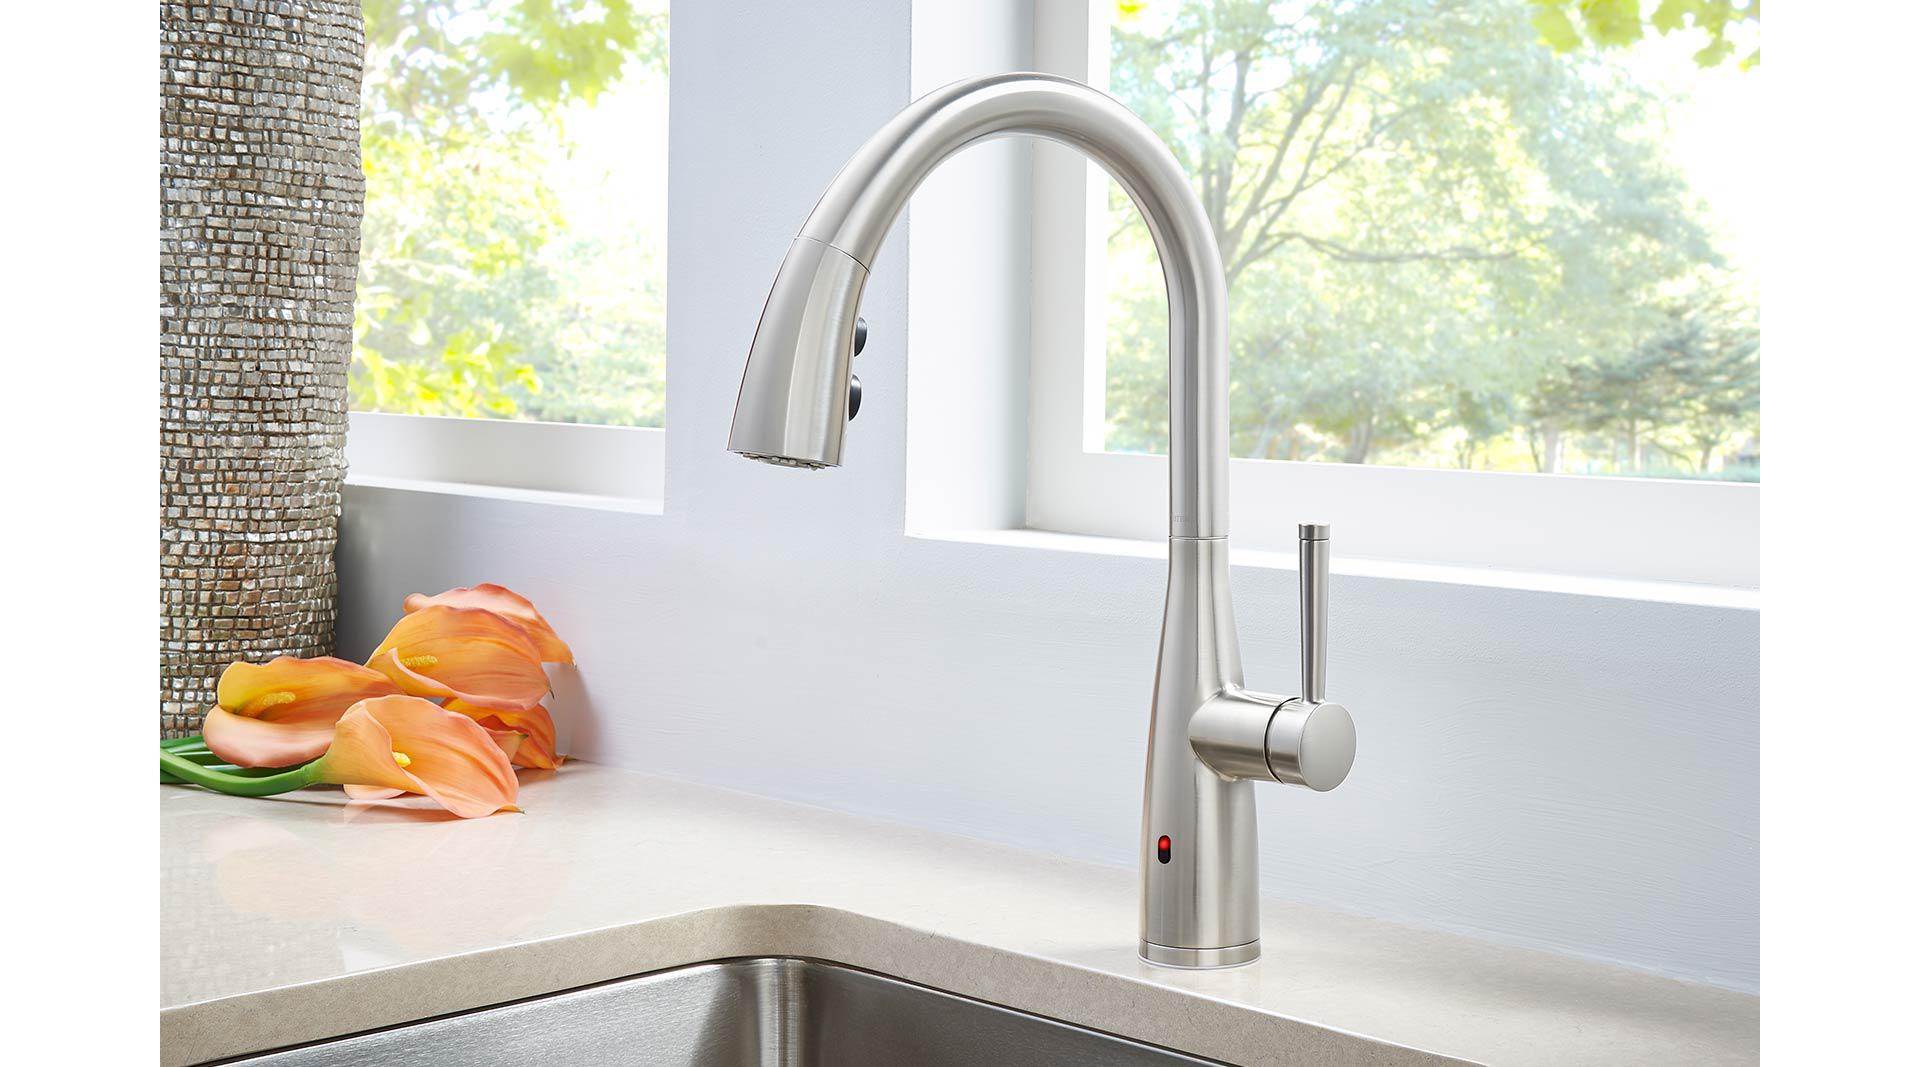 Touchless Kitchen Faucet Technology is amazing